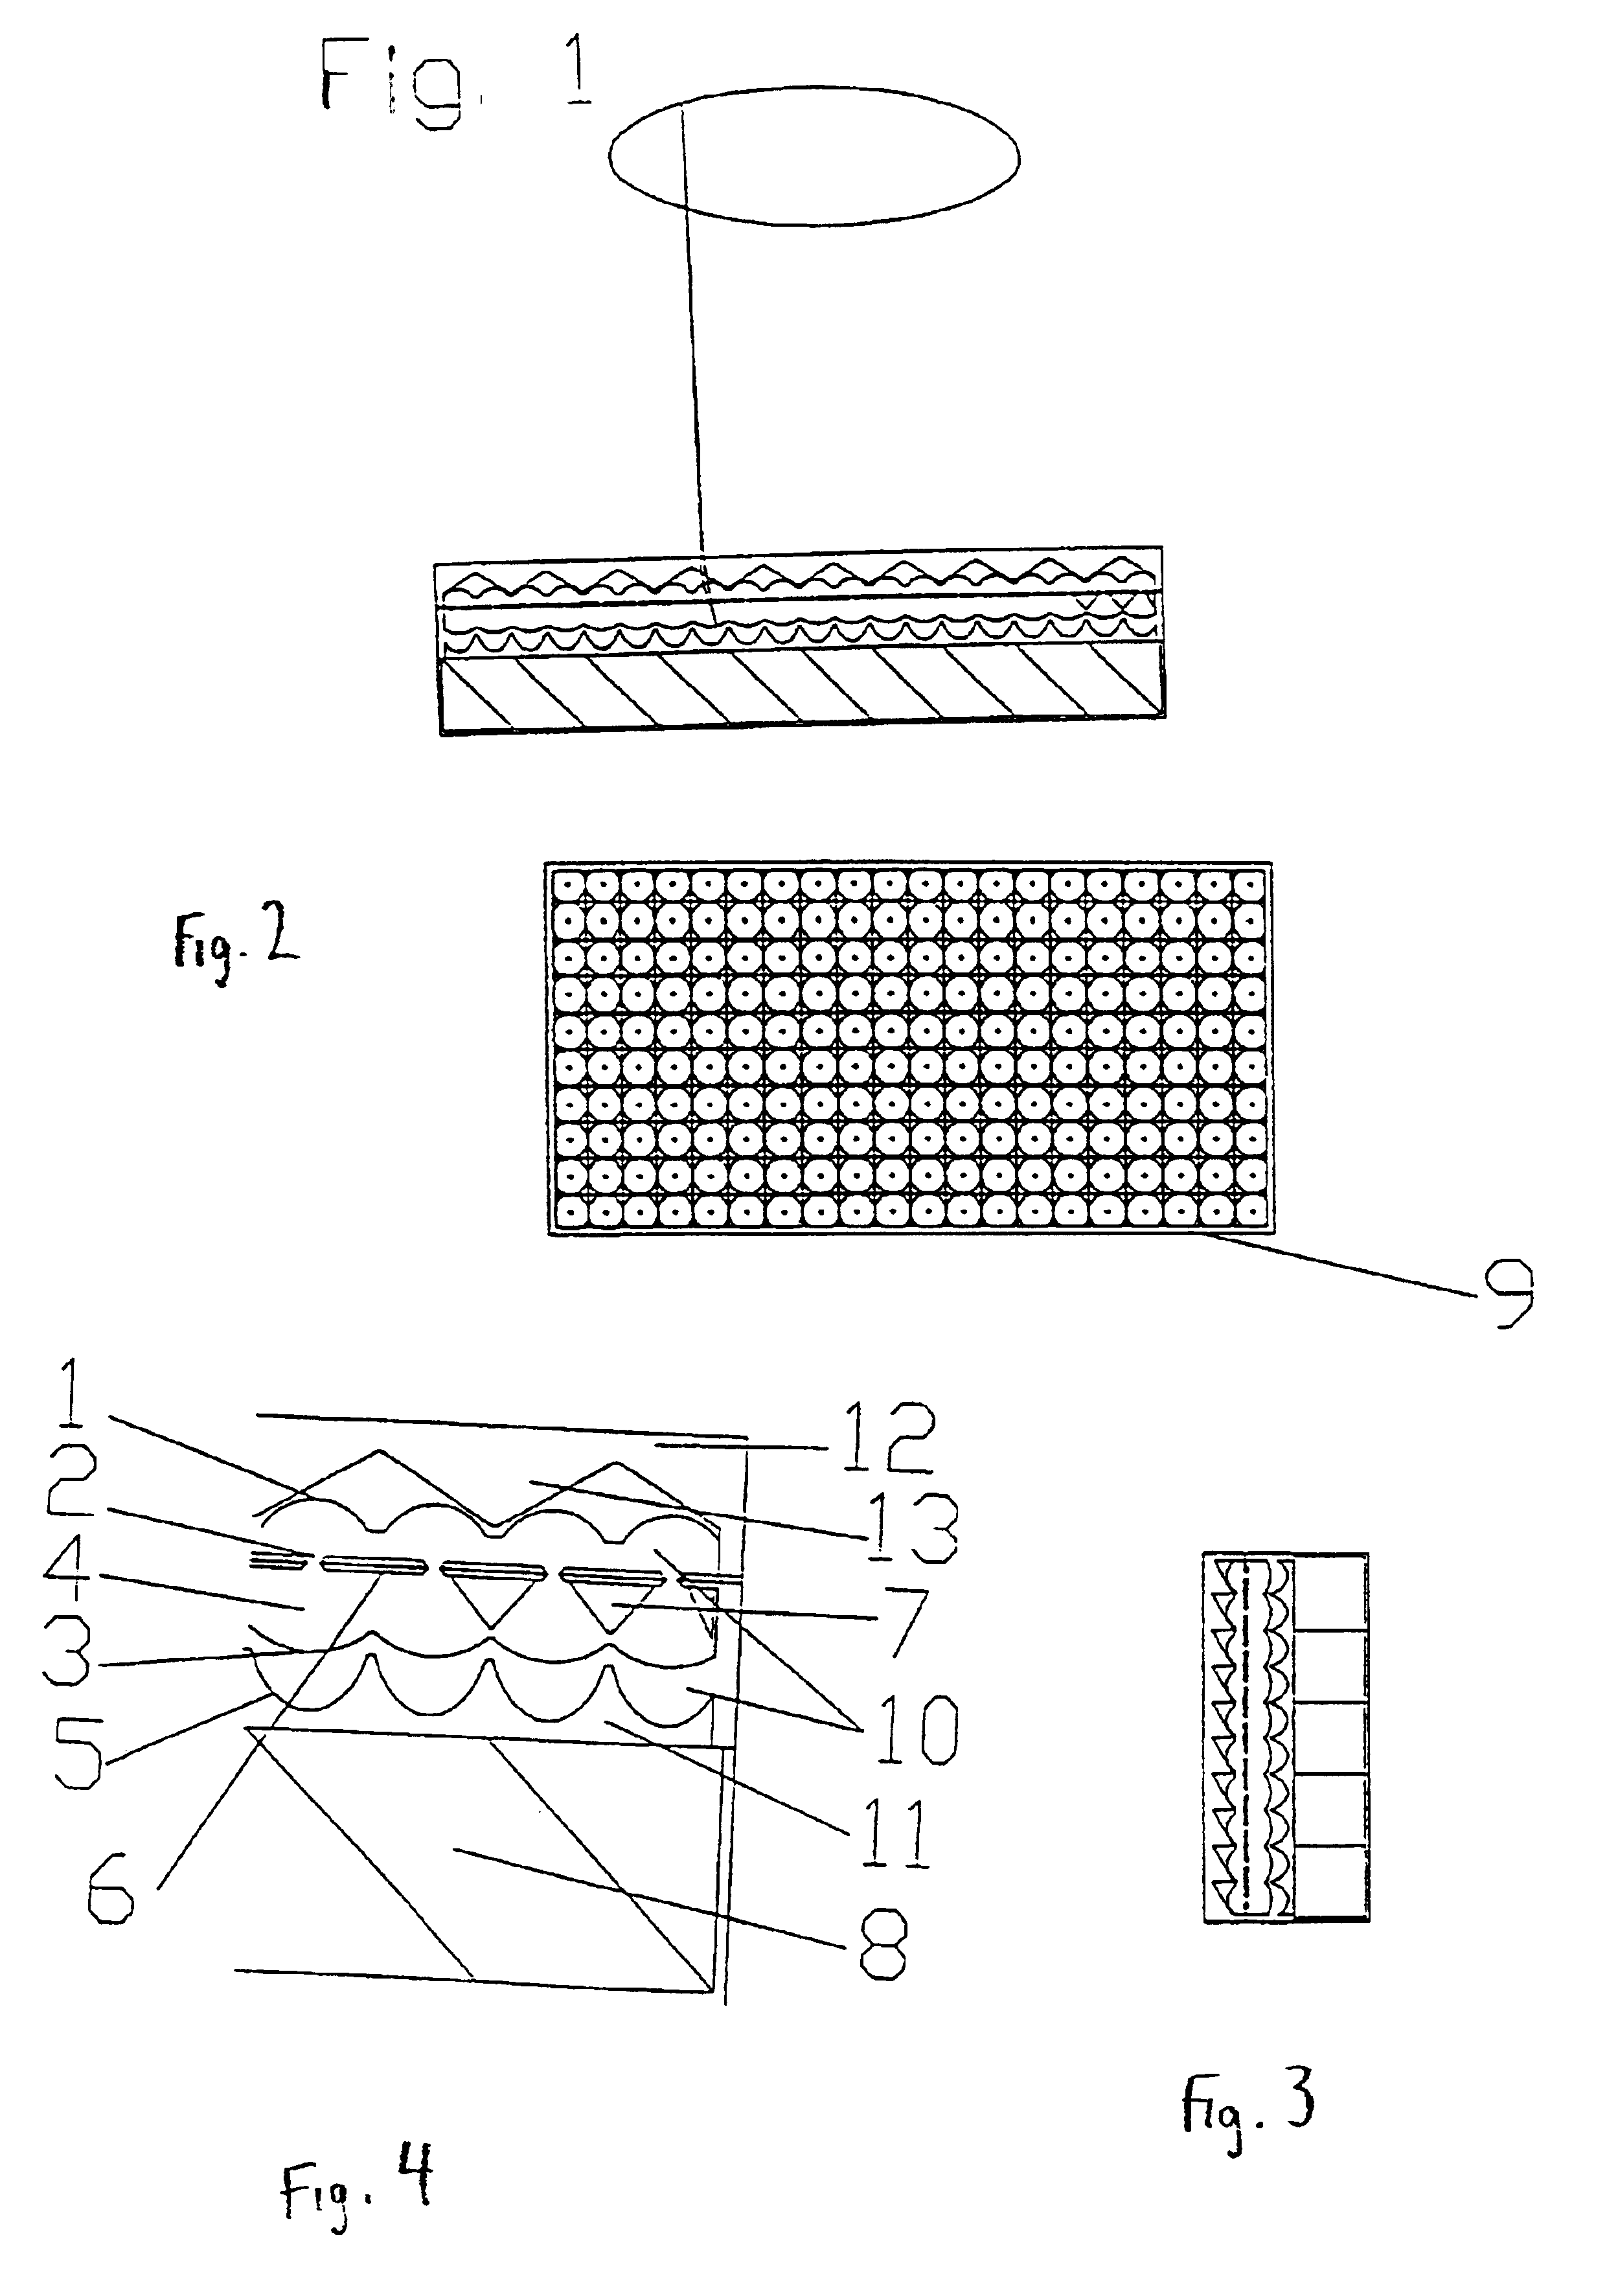 Computer processed integral photography apparatus and process for large 3D image production